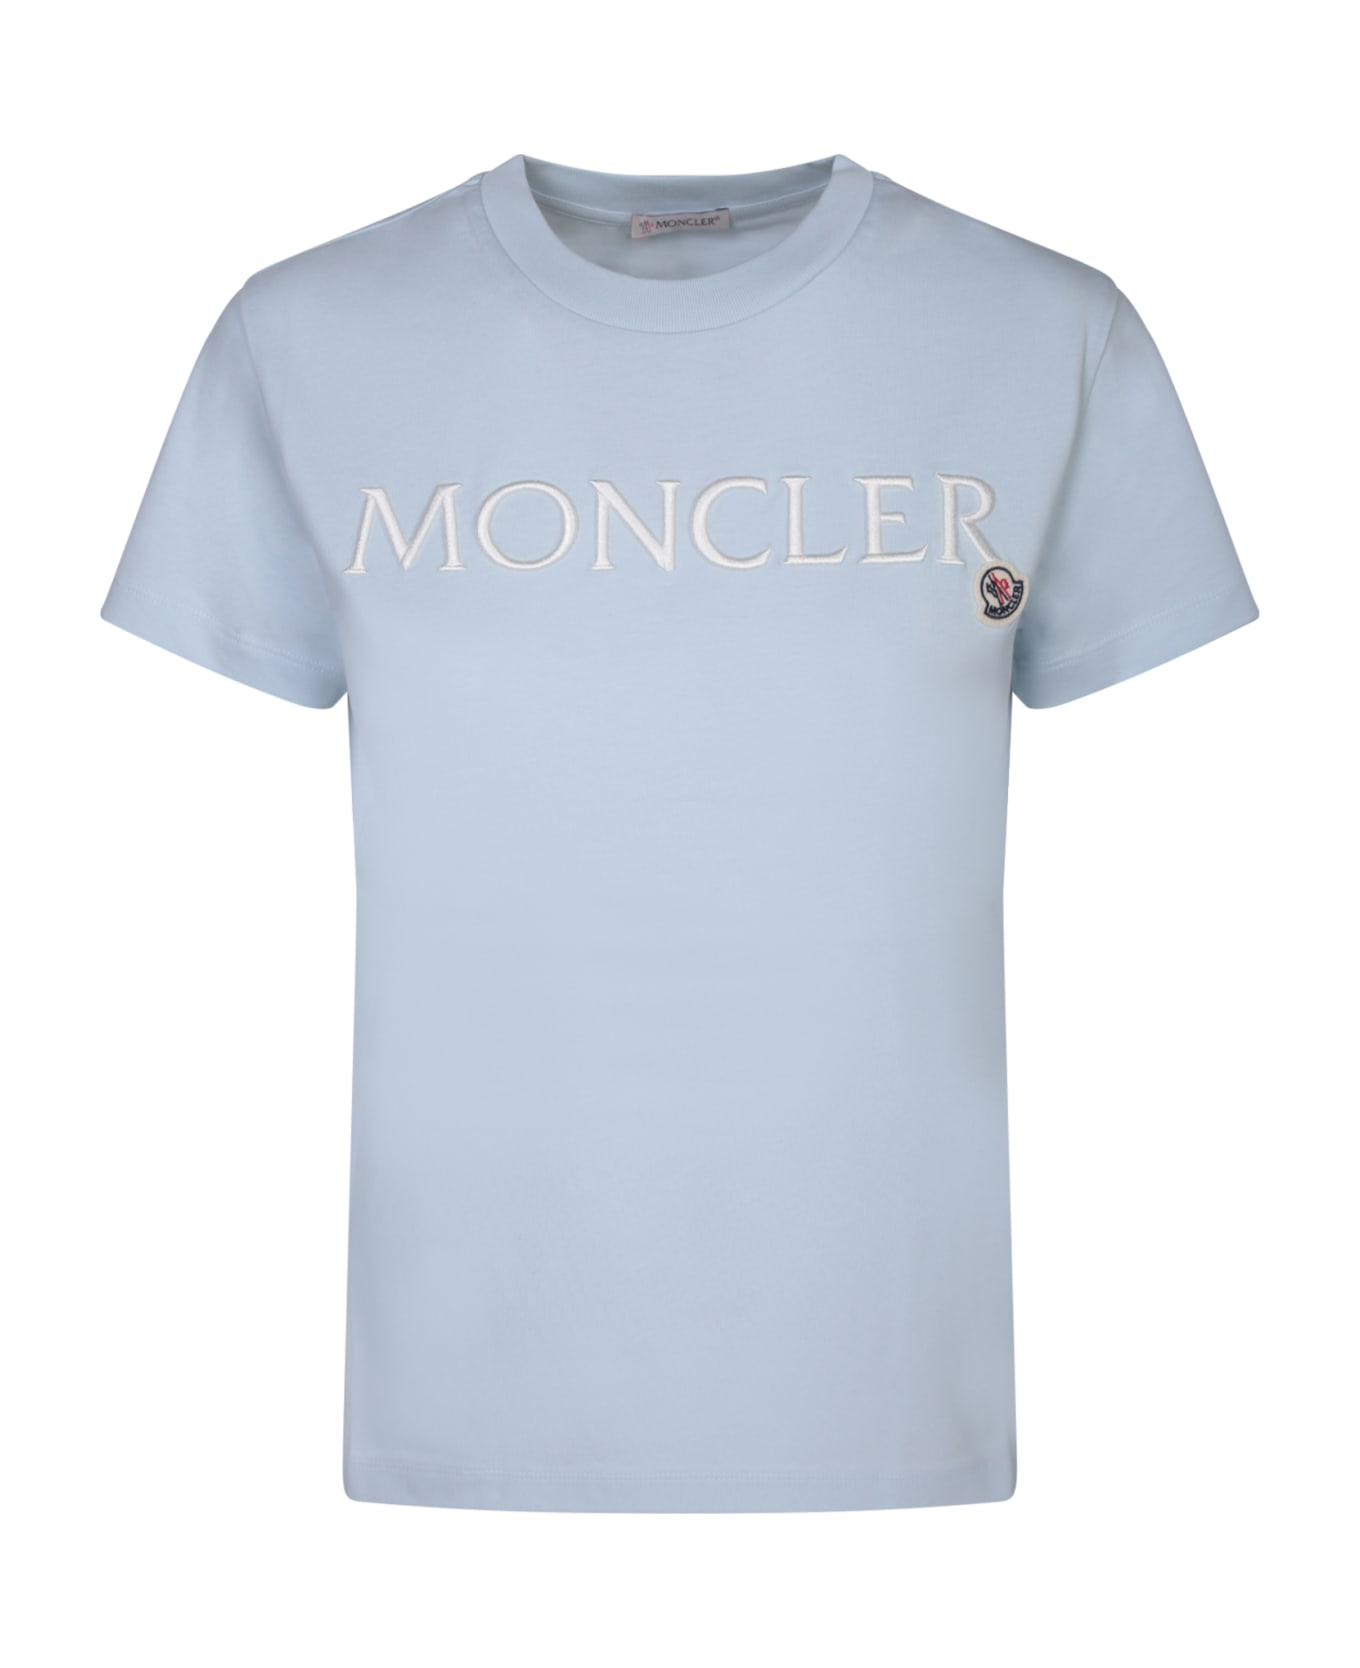 Moncler T-shirt With Logo - Blue Tシャツ